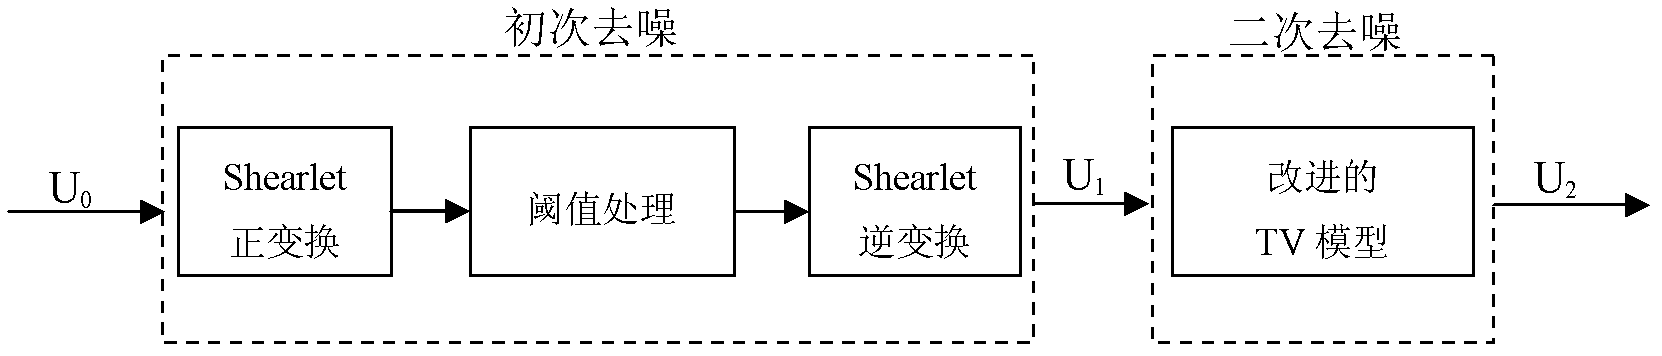 Image denoising method based on Shearlet contraction and improved TV model